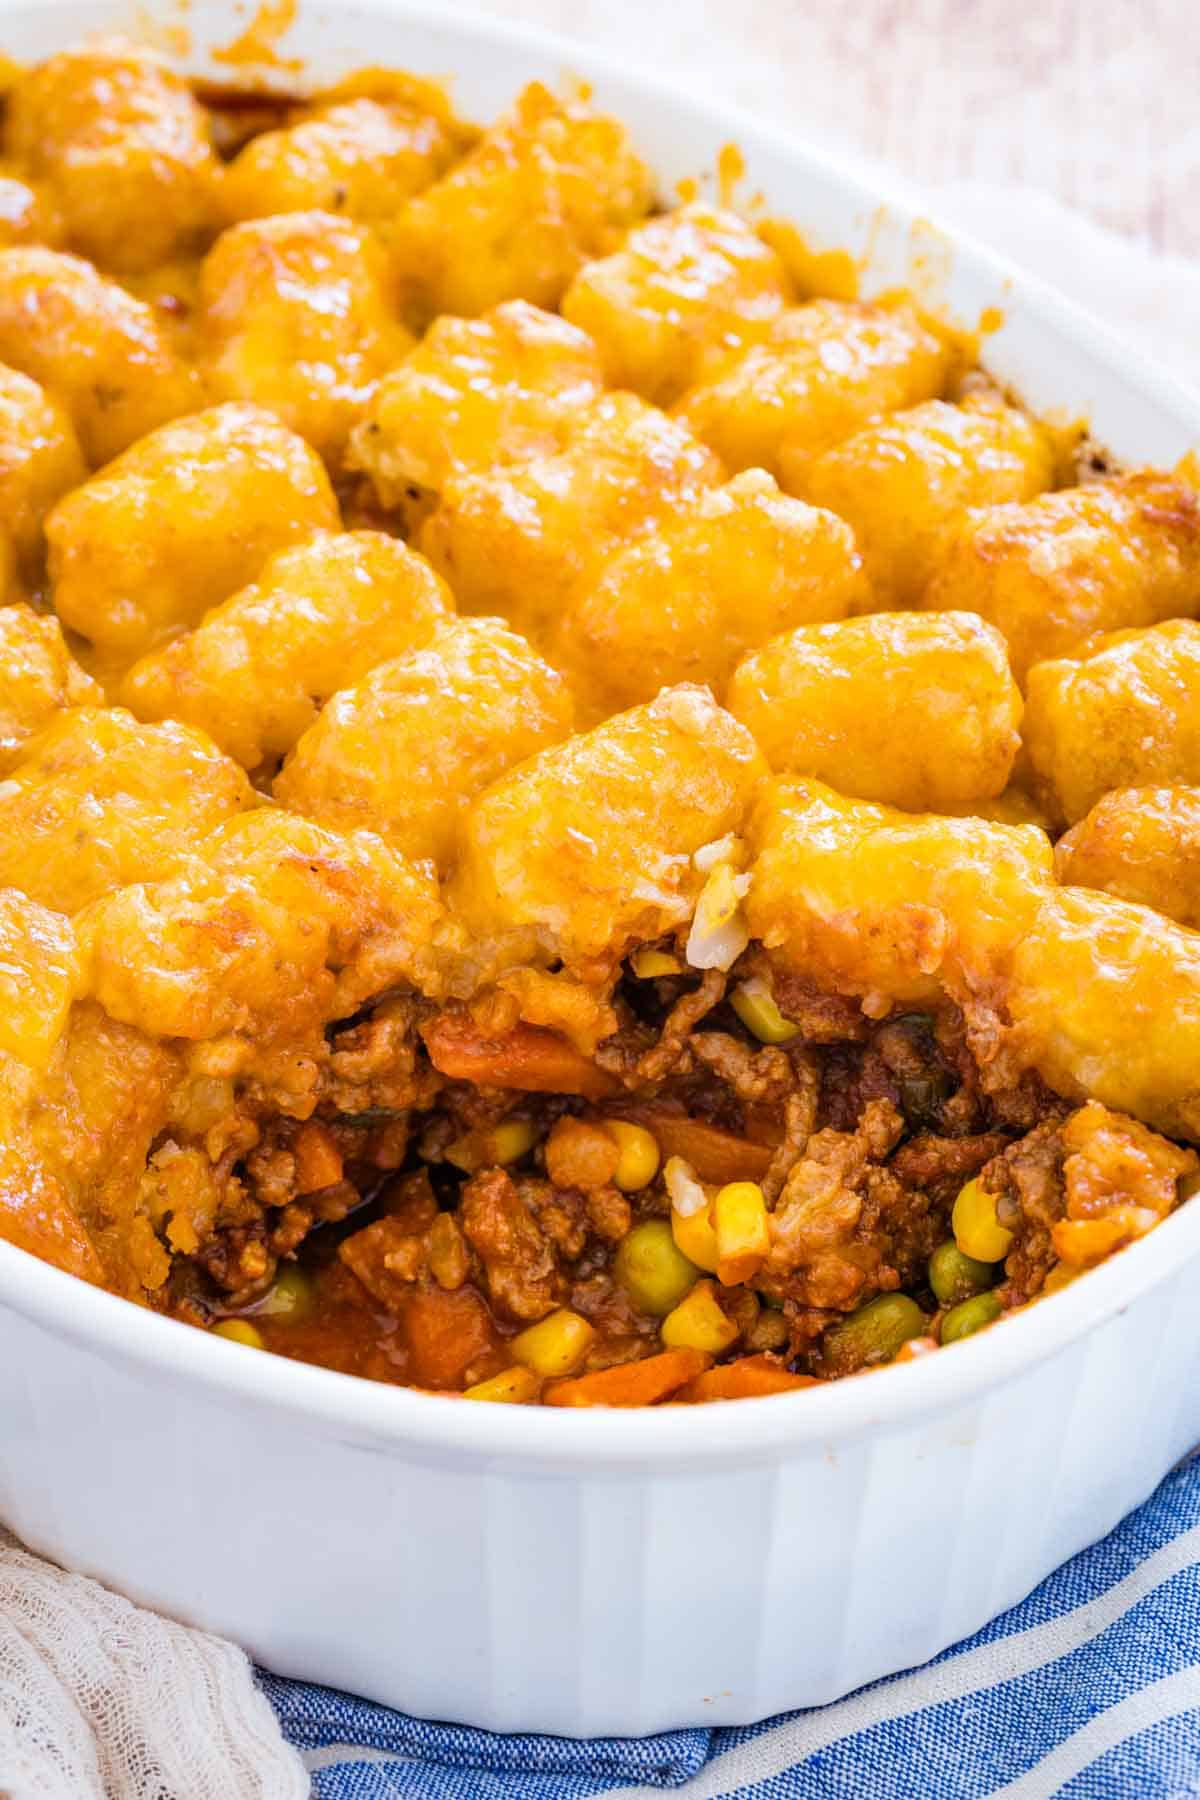 Tater tot shepherd's pie casserole in a baking dish with a serving missing.